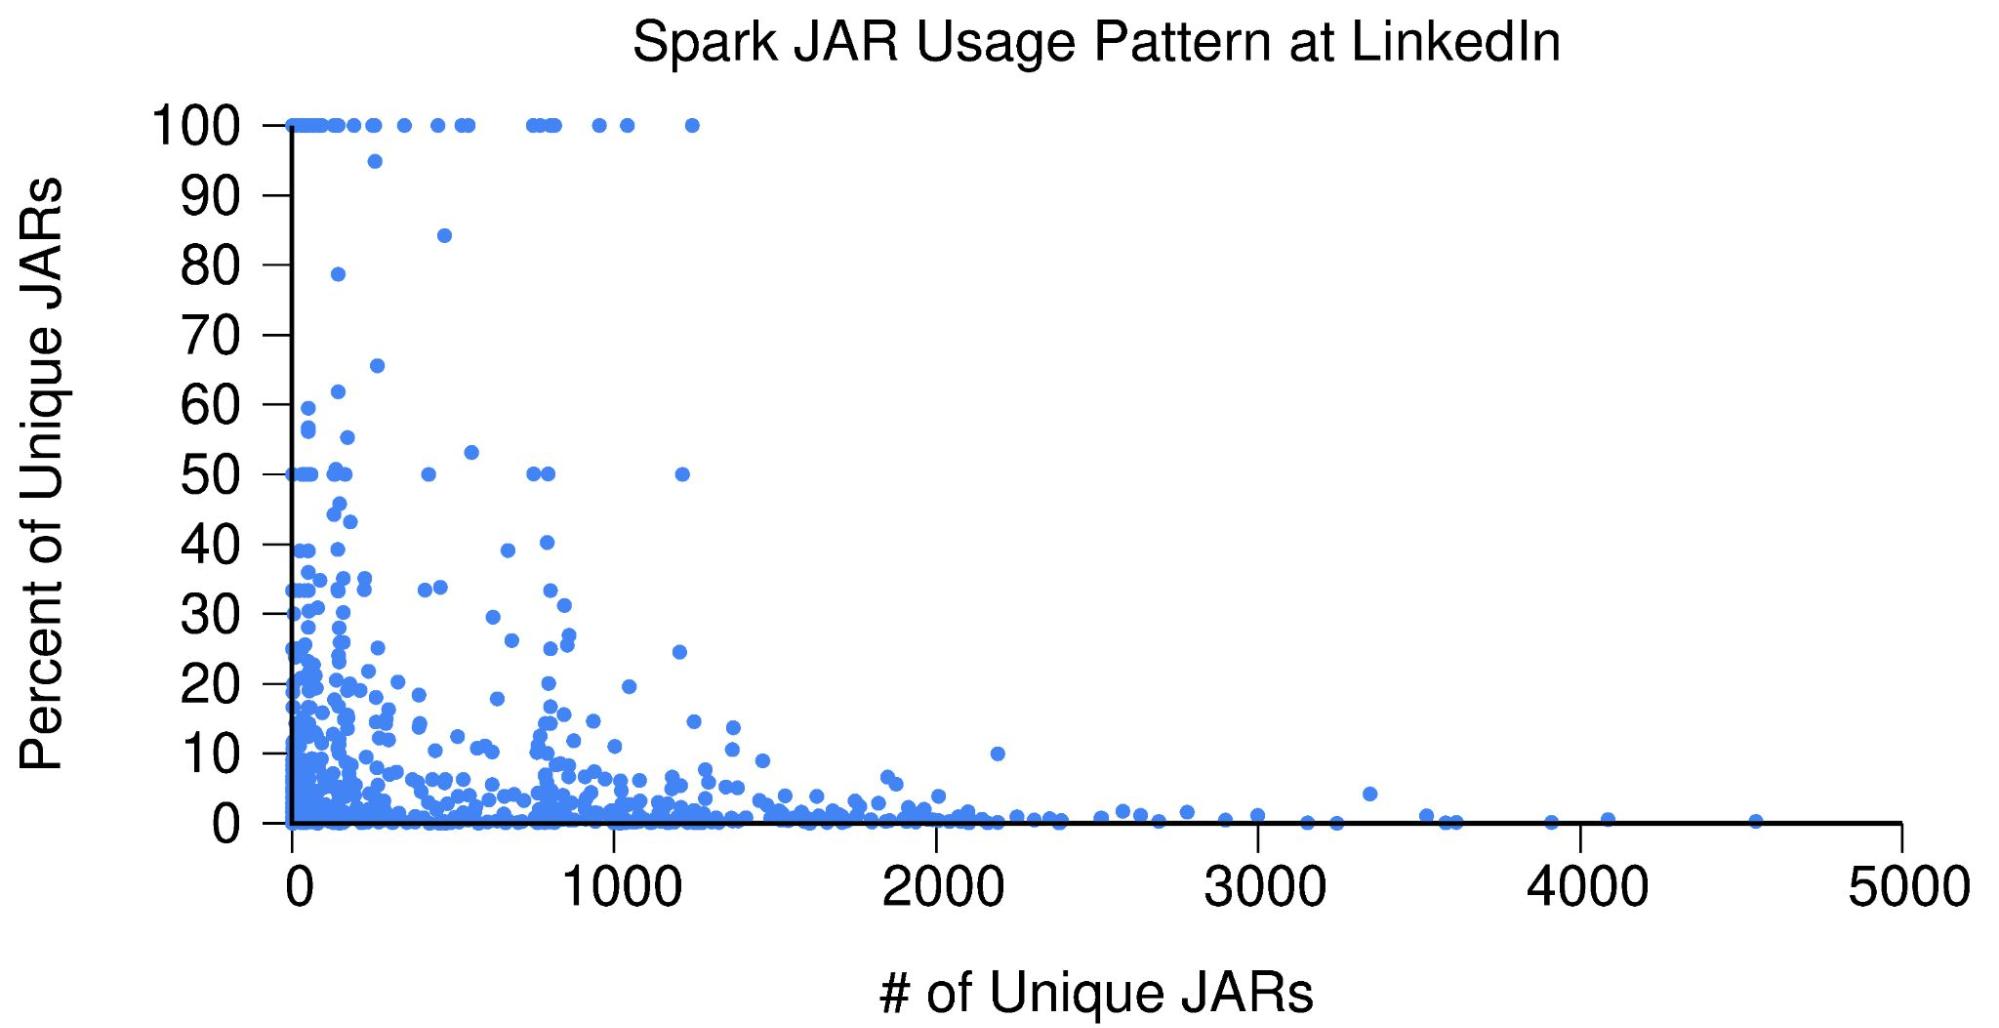 Chart that depicts Spark JAR usage pattern